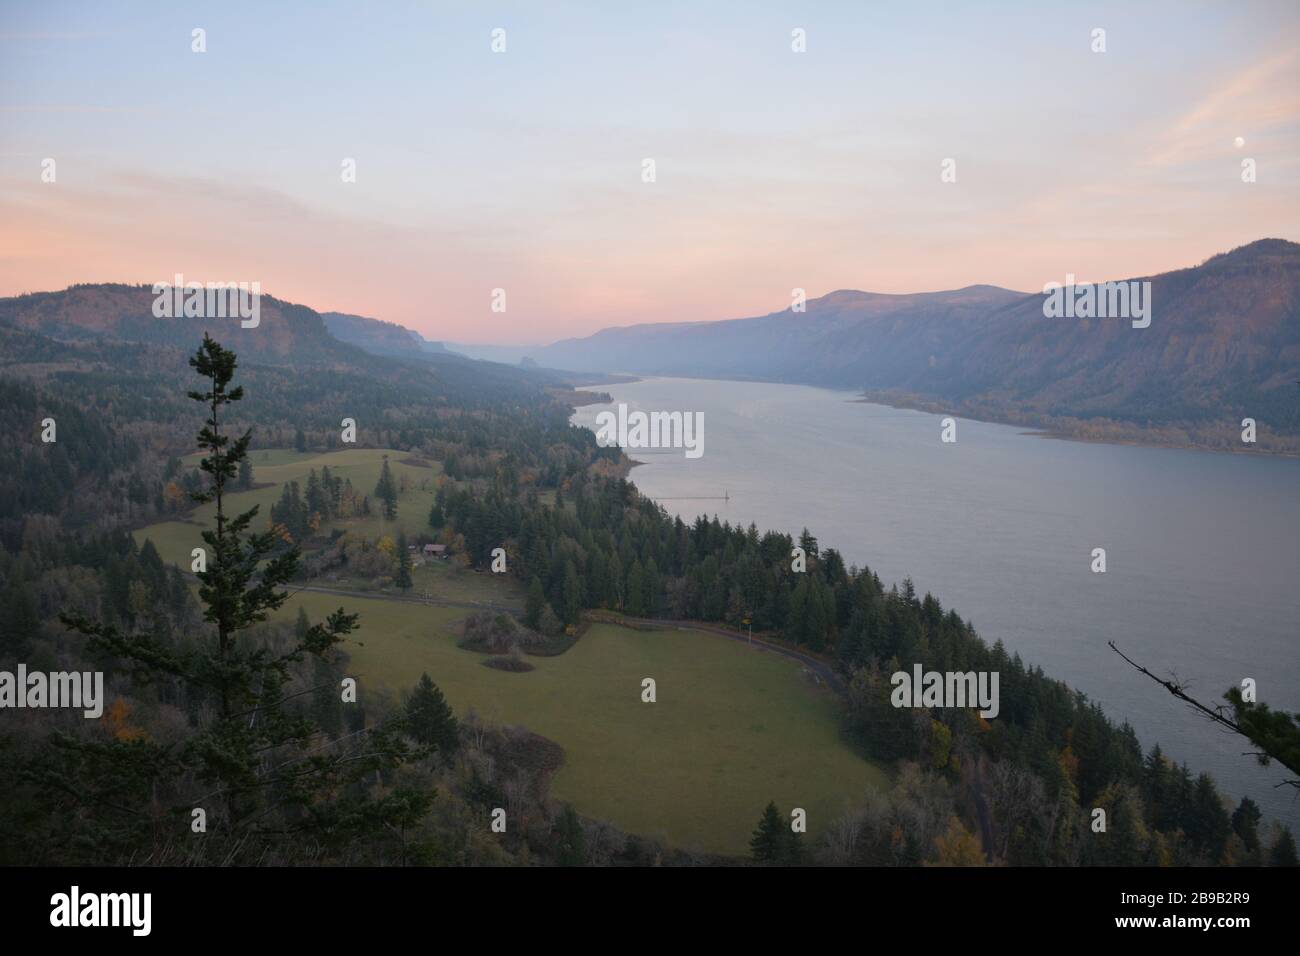 Sunset on the Columbia River Gorge looking east from the Cape Horn lookout on Highway 14, Washington State, USA. Stock Photo